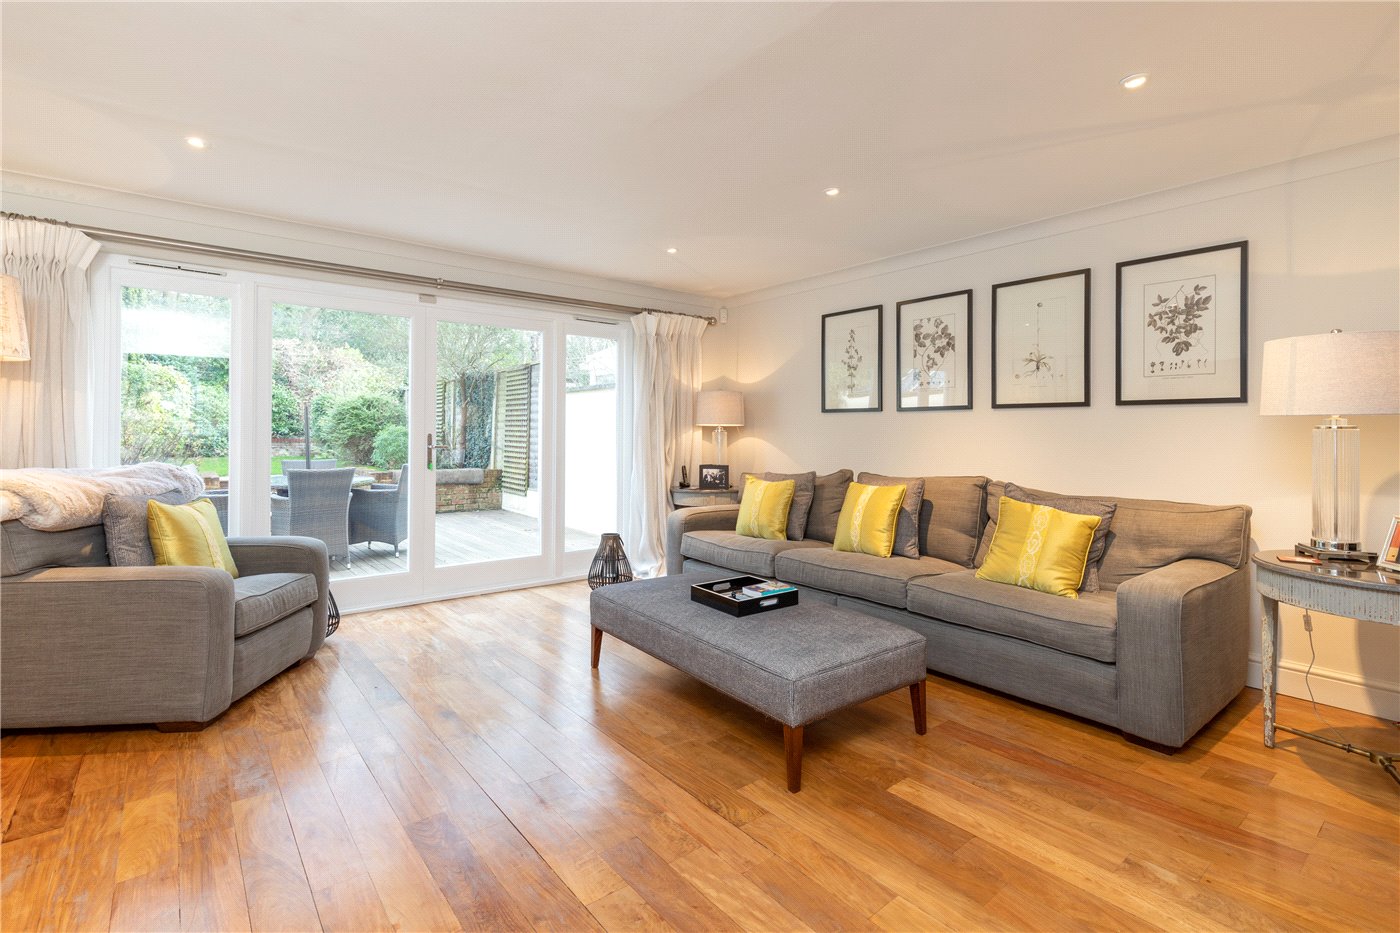 1 bedroom detached house for sale in London